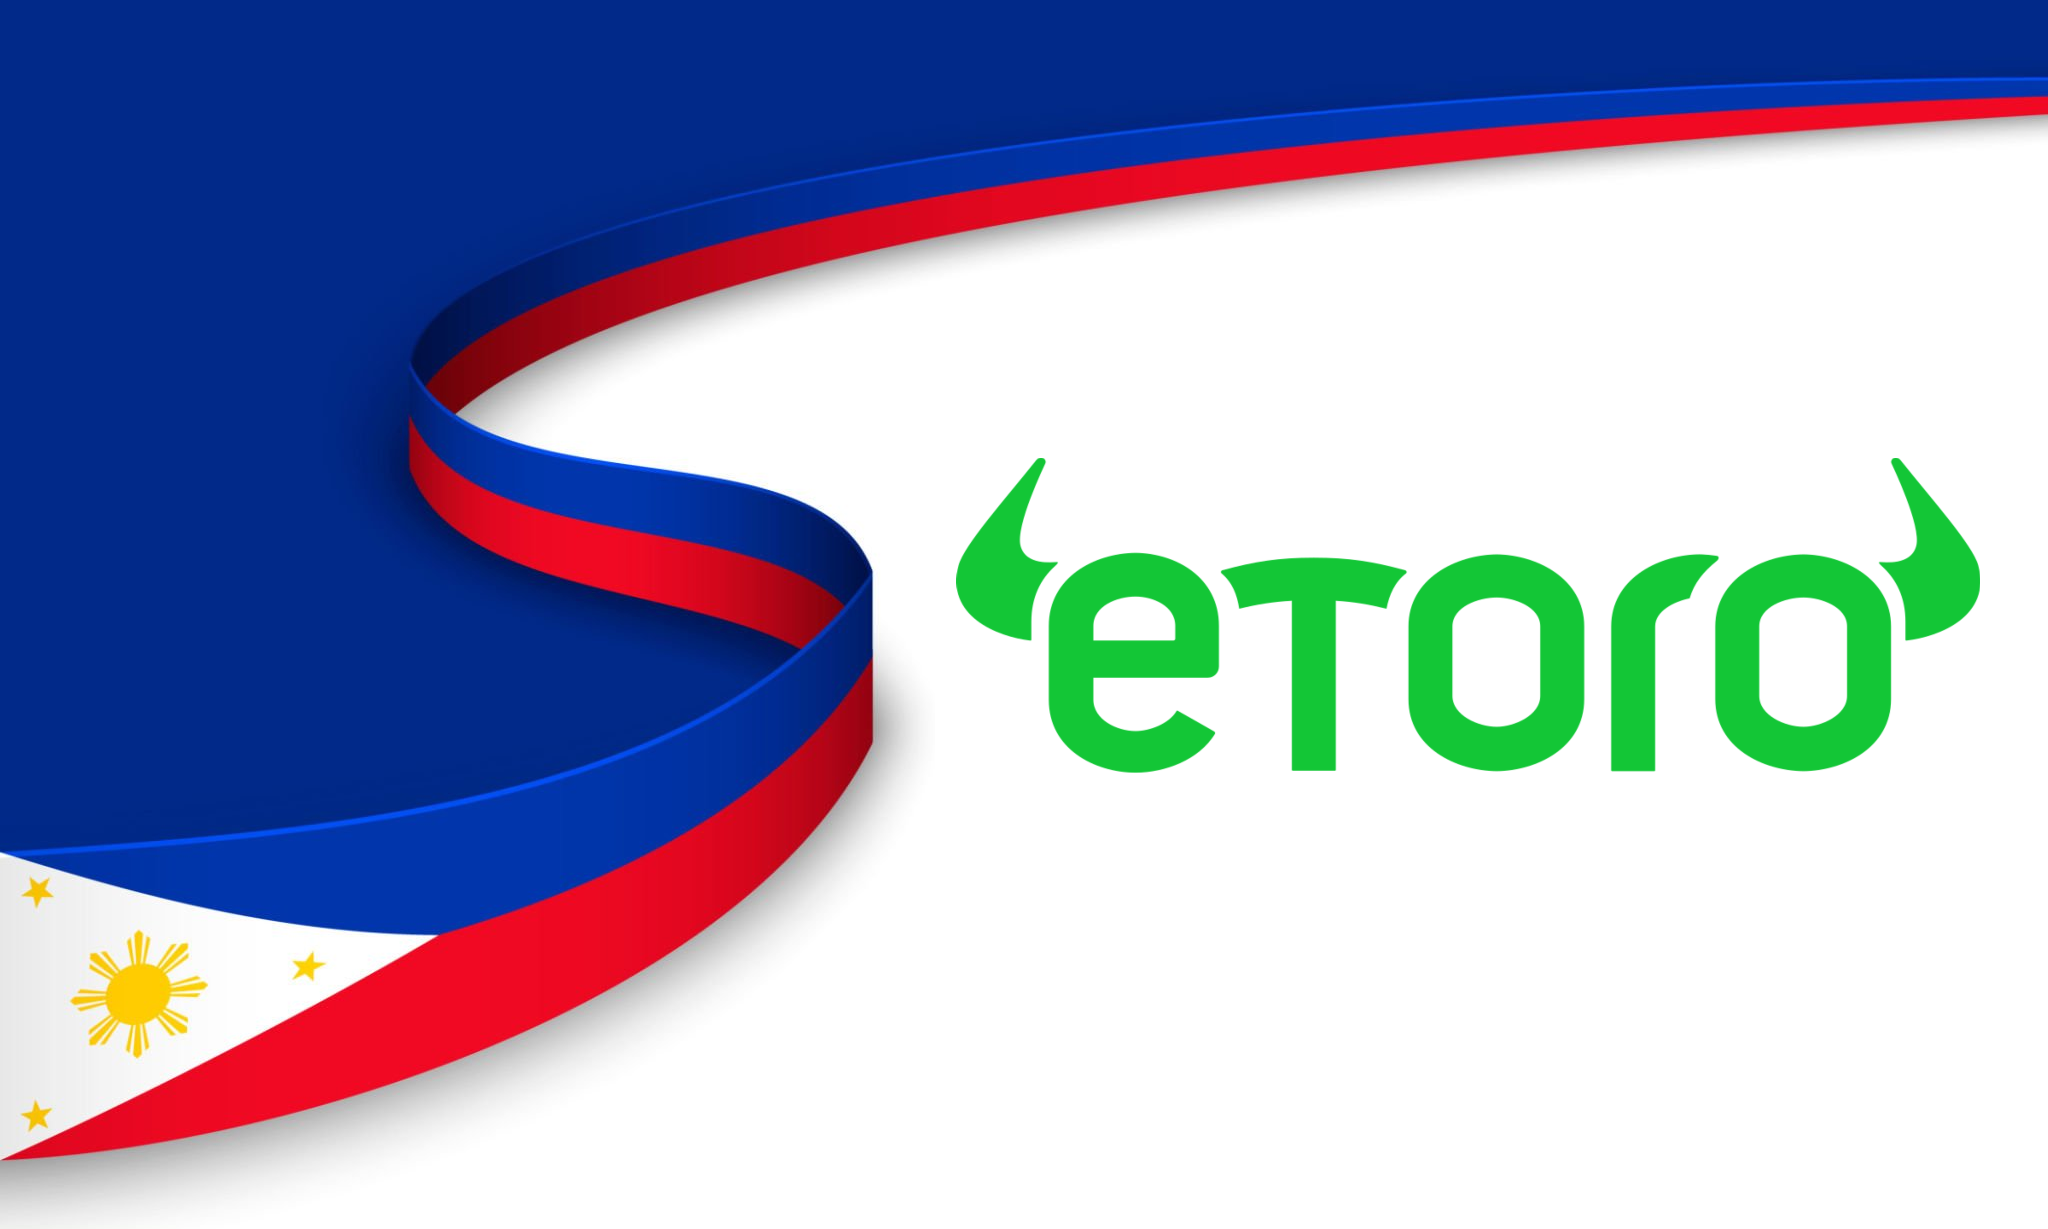 The Philippine SEC cautioned the public against investing on the eToro platform, stating it is not authorized to offer securities in the country.